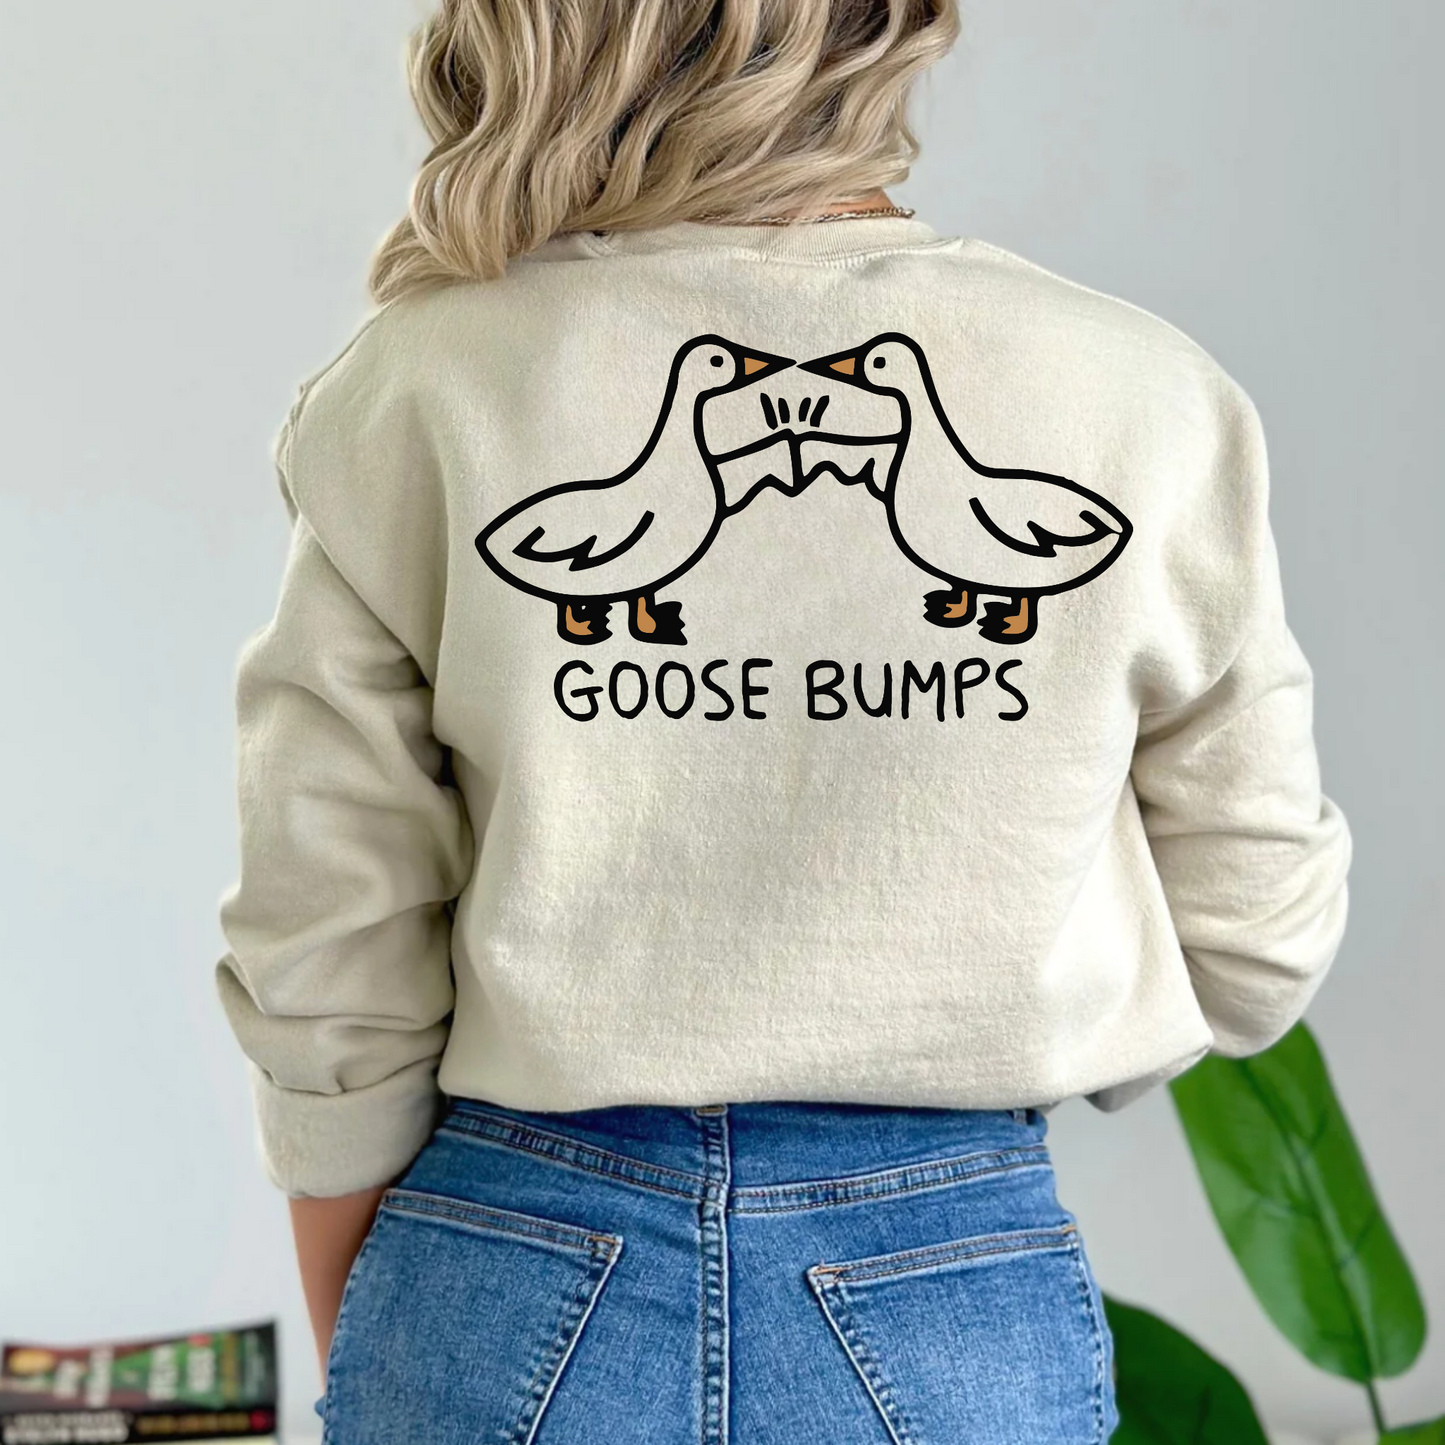 (shirt not included) Goose Bumps - Clear Film Transfer